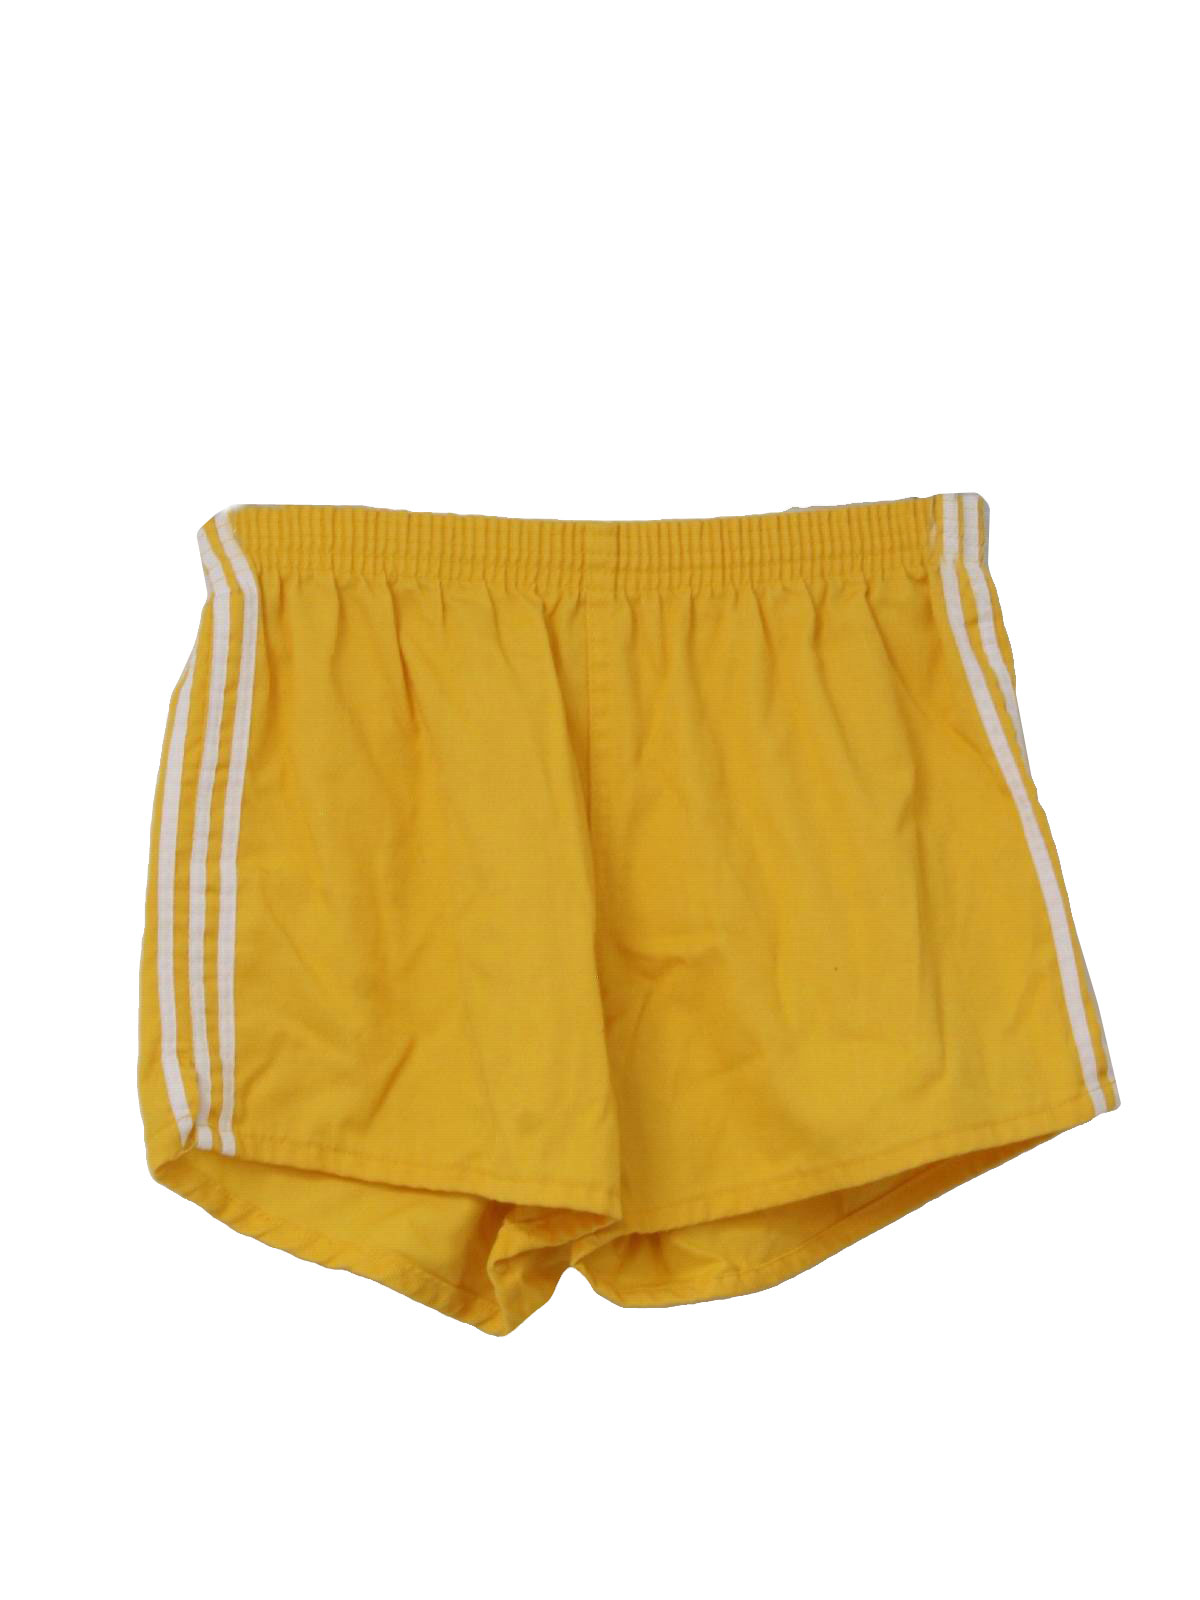 Retro 1980's Shorts (Missing Label) : 80s -Missing Label- Mens yellow ...